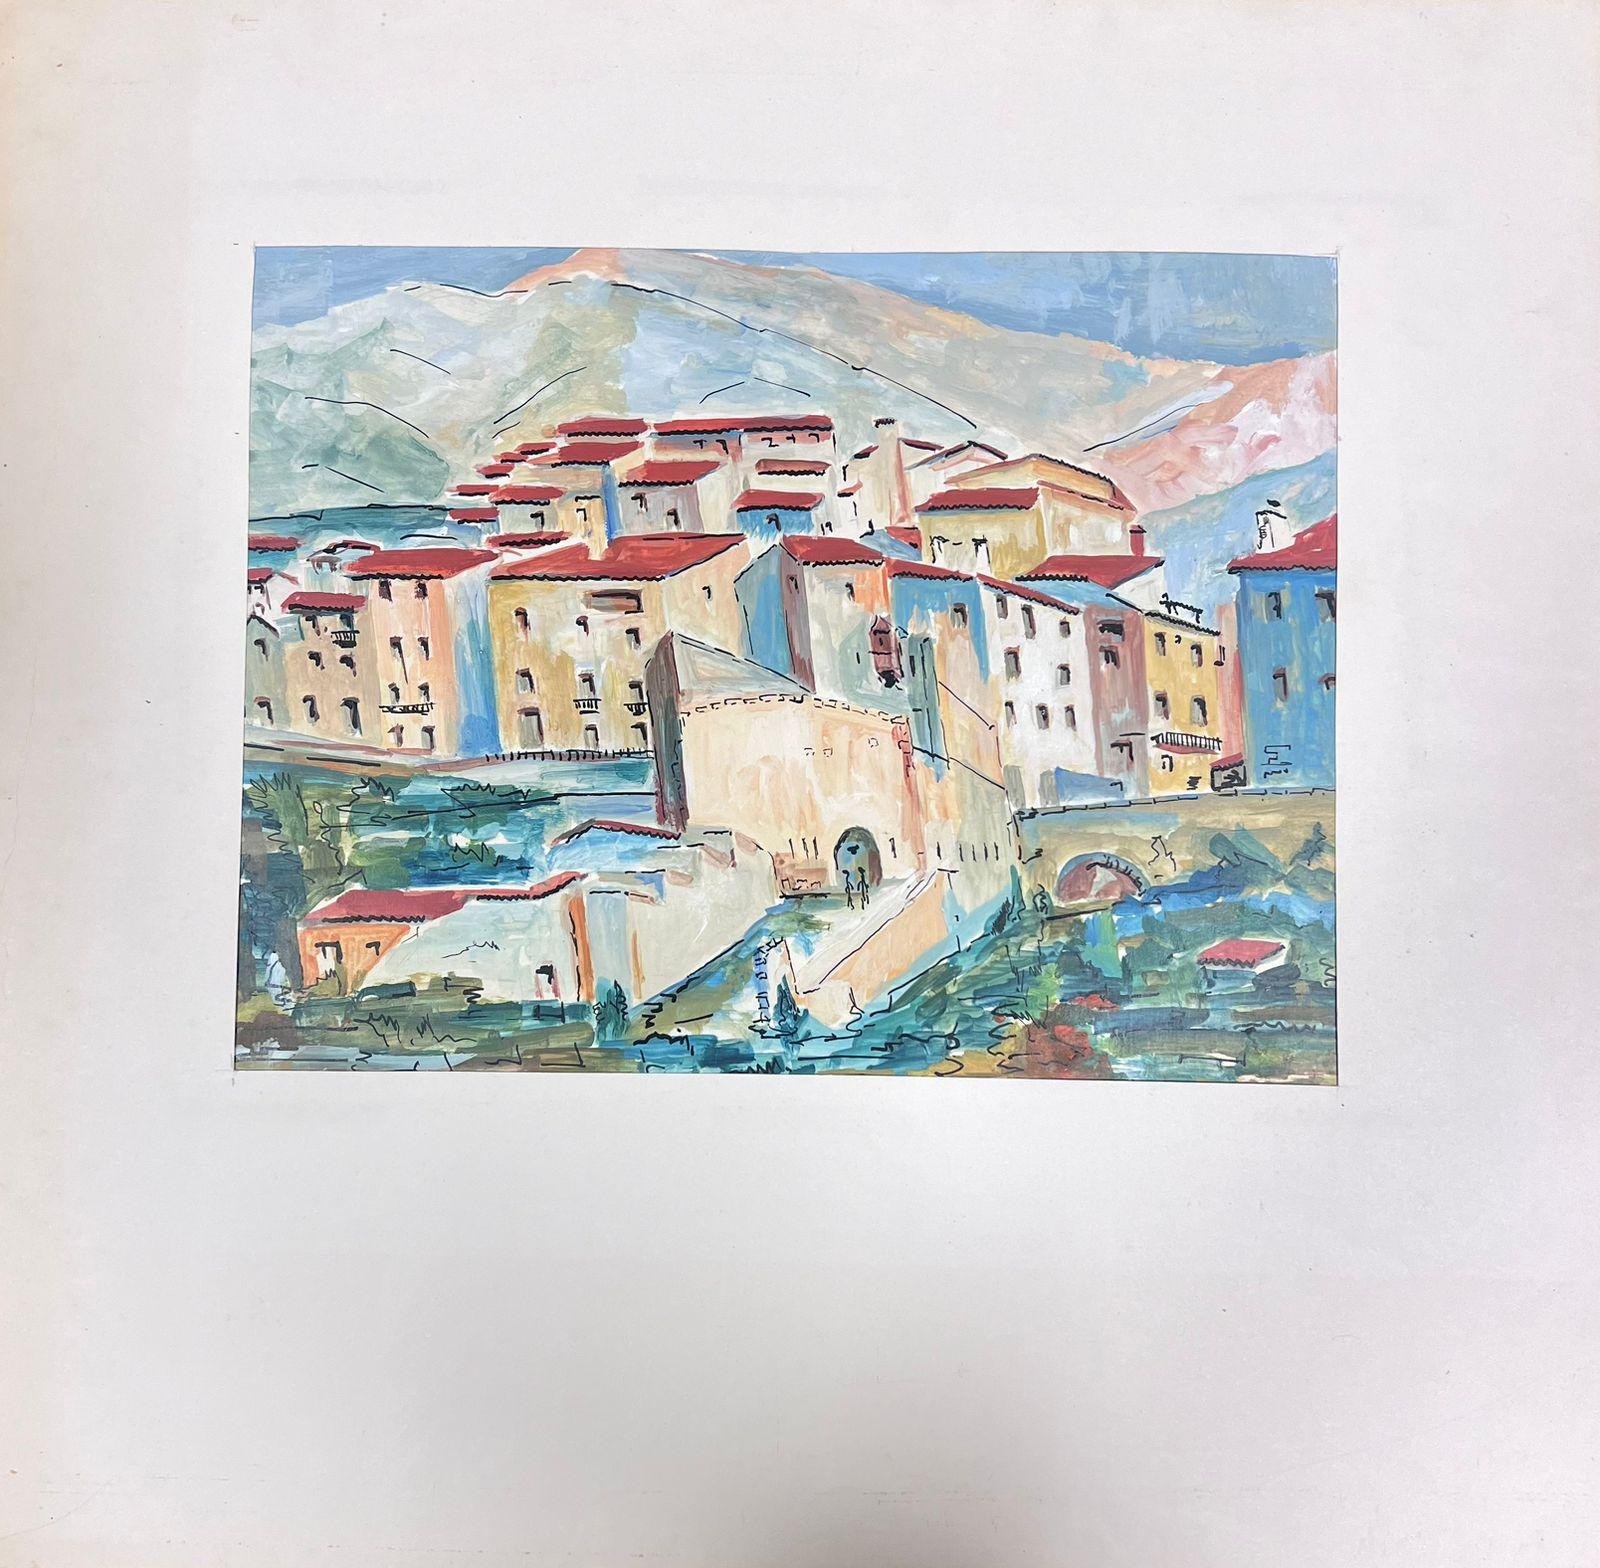 French Landscape
by Bernard Labbe (French mid 20th century) 
original gouache on artist paper, mounted in a card frame
size: 20 x 20 inches
condition: very good and ready to be enjoyed

provenance: the artists atelier/ studio, France (stamped verso)